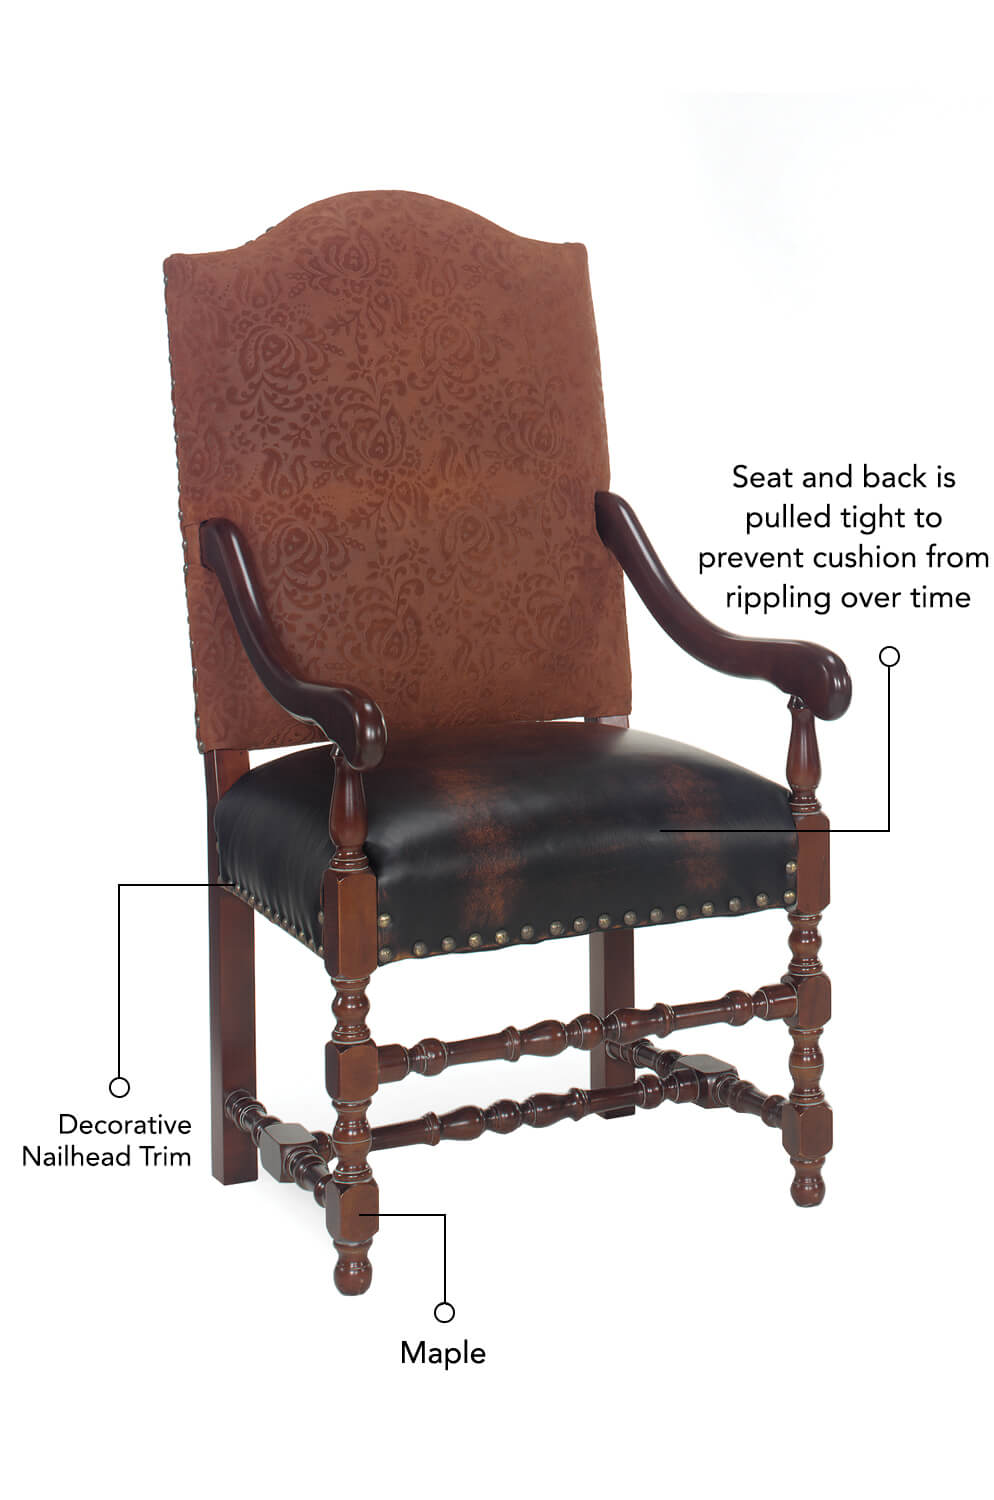 Seat and back is pulled tight to prevent cushion from rippling over time, base is made of Maple, and decorative nailhead treatments outline the base of the seat.